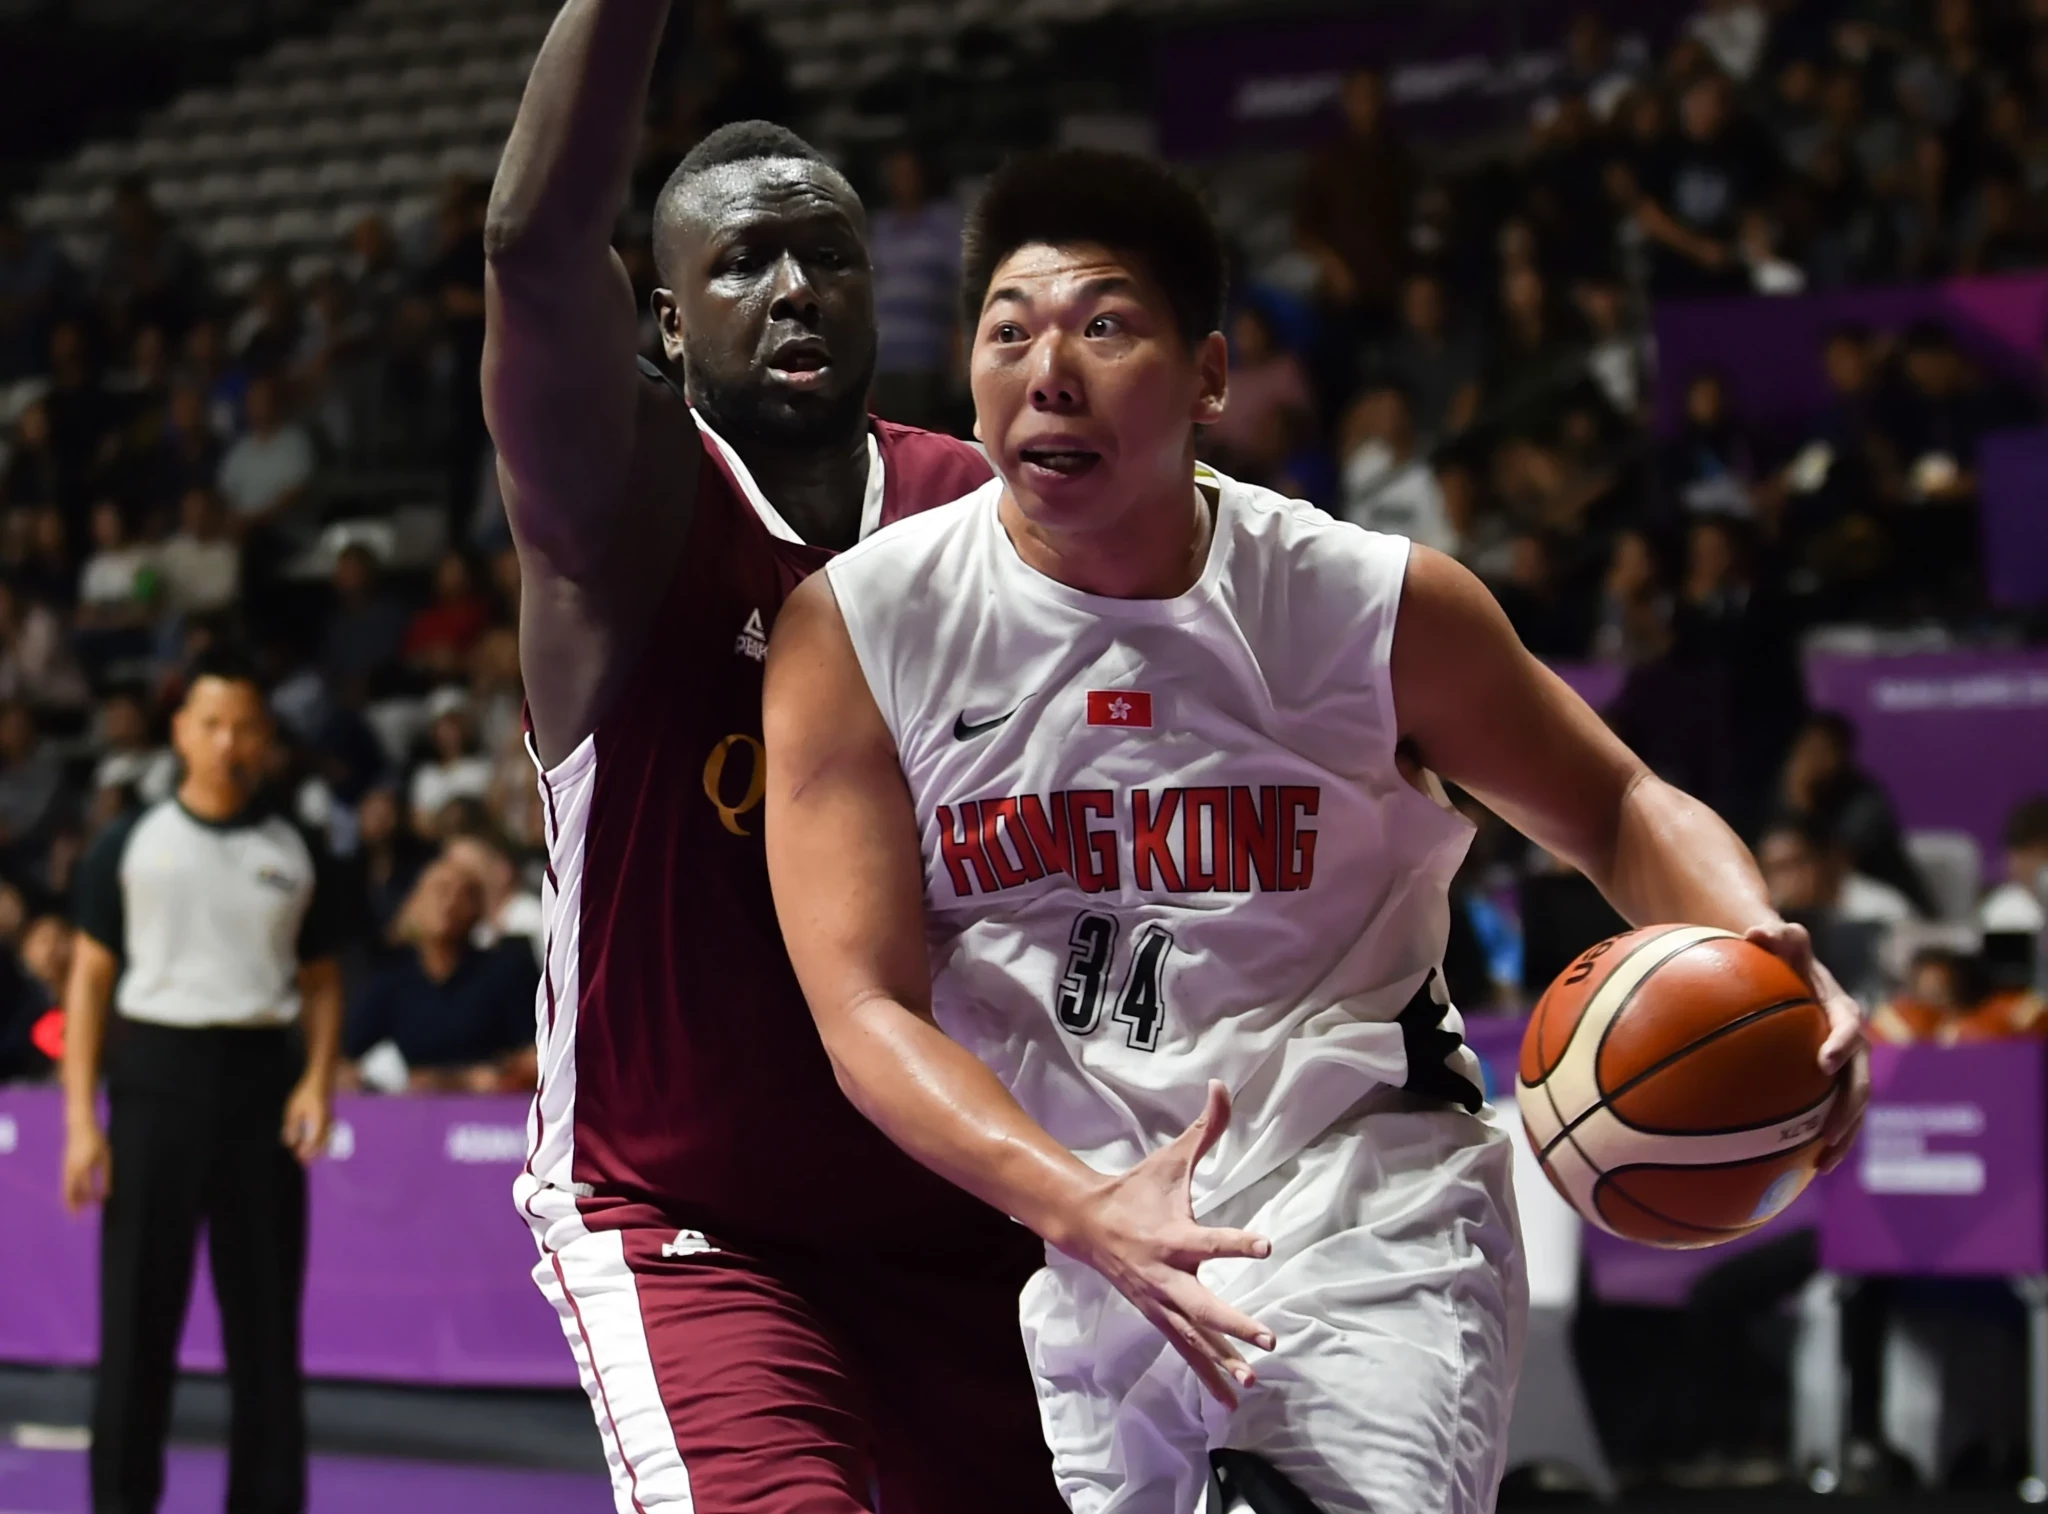 Hong Kong's basketball team lost all three of their matches at the 2018 Asian Games in Jakarta Palembang ©Getty Images